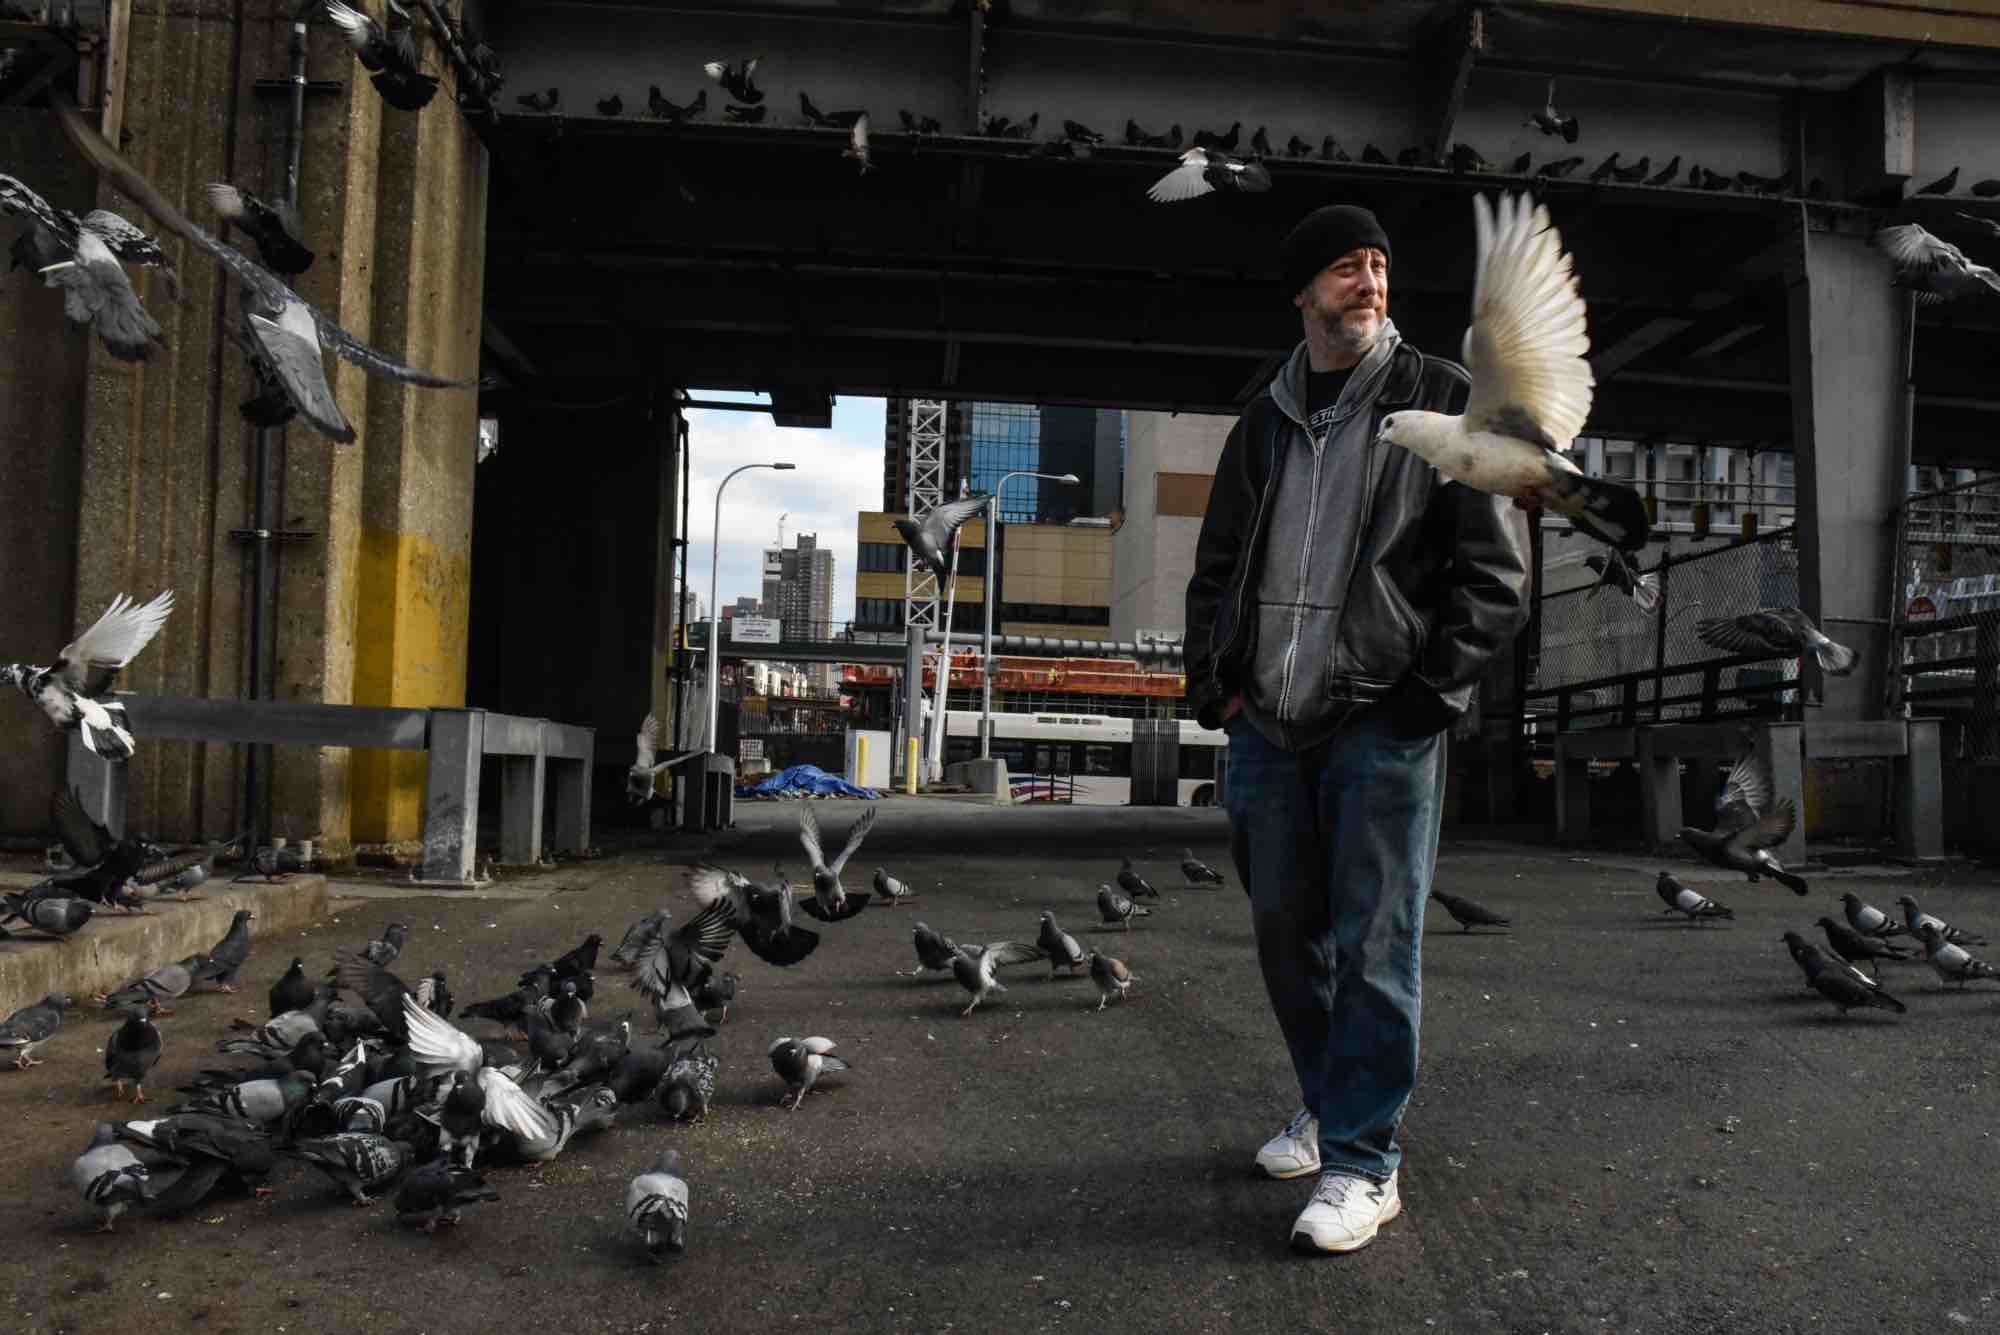 John Painz with a colony of pigeons on the west side of the Lincoln Tunnel area while on pigeon patrol in Manhattan, New York, U.S., February 24, 2023. (Stephanie Keith / Hell Gate)